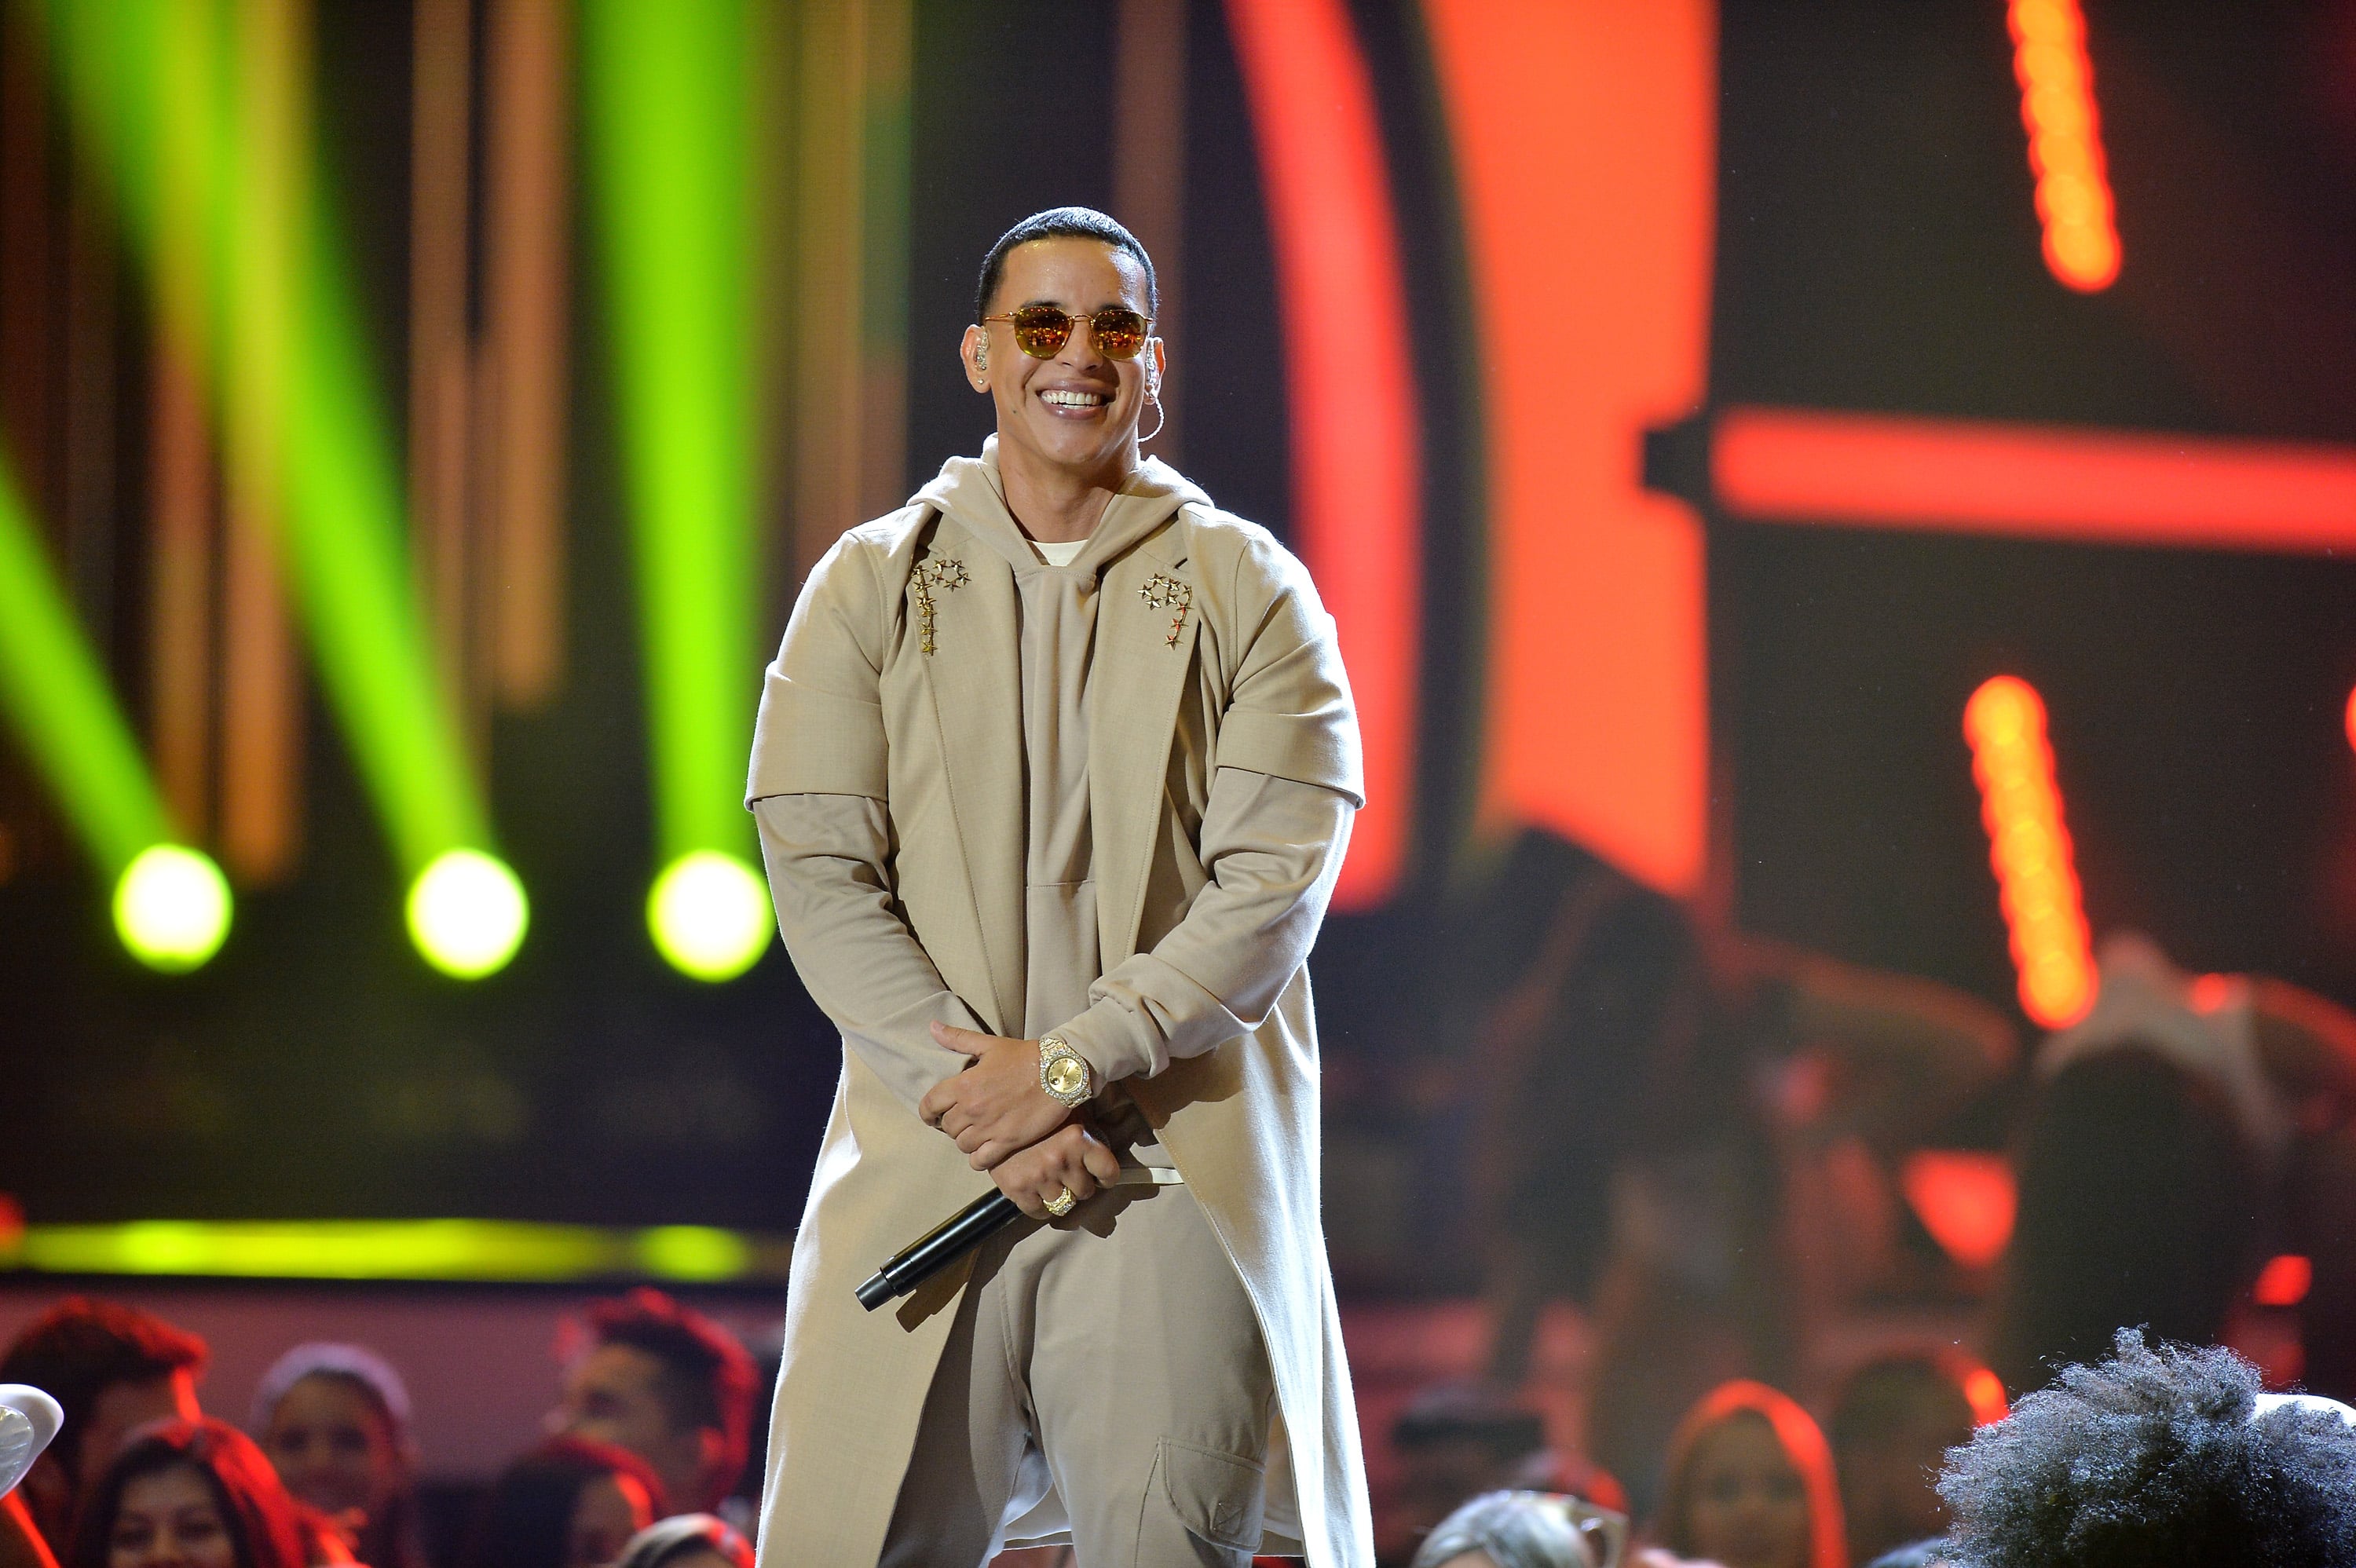 Daddy Yankee Donates $1 Million to Puerto Rico as He Is Reunited